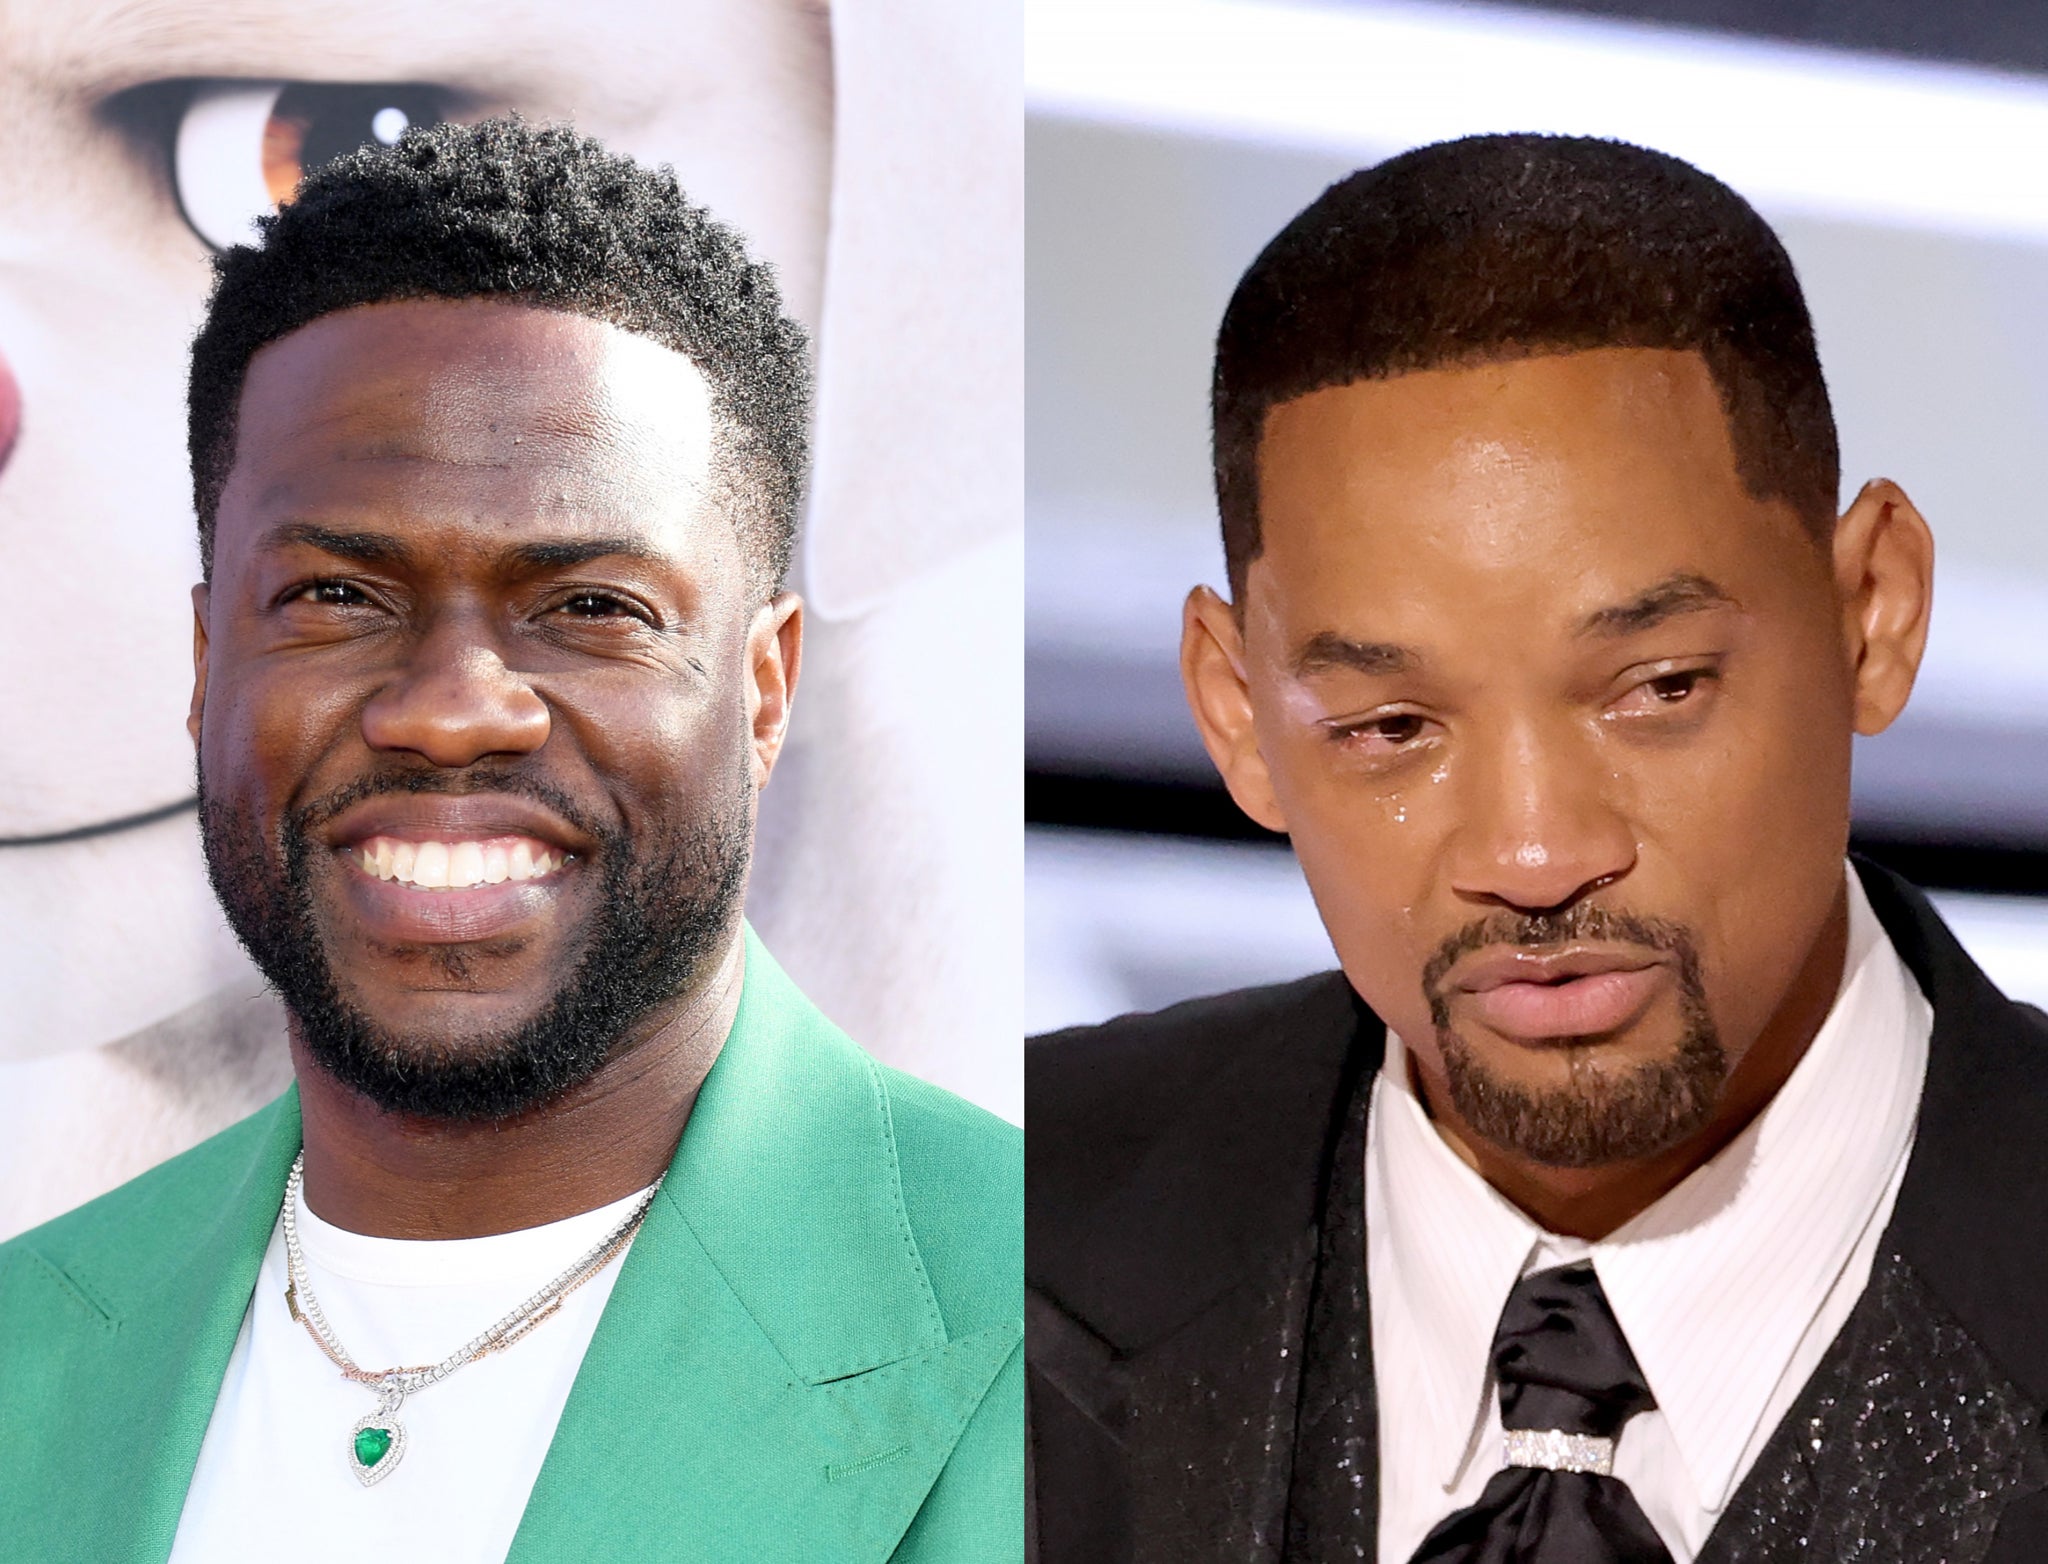 Kevin Hart (left) and Will Smith